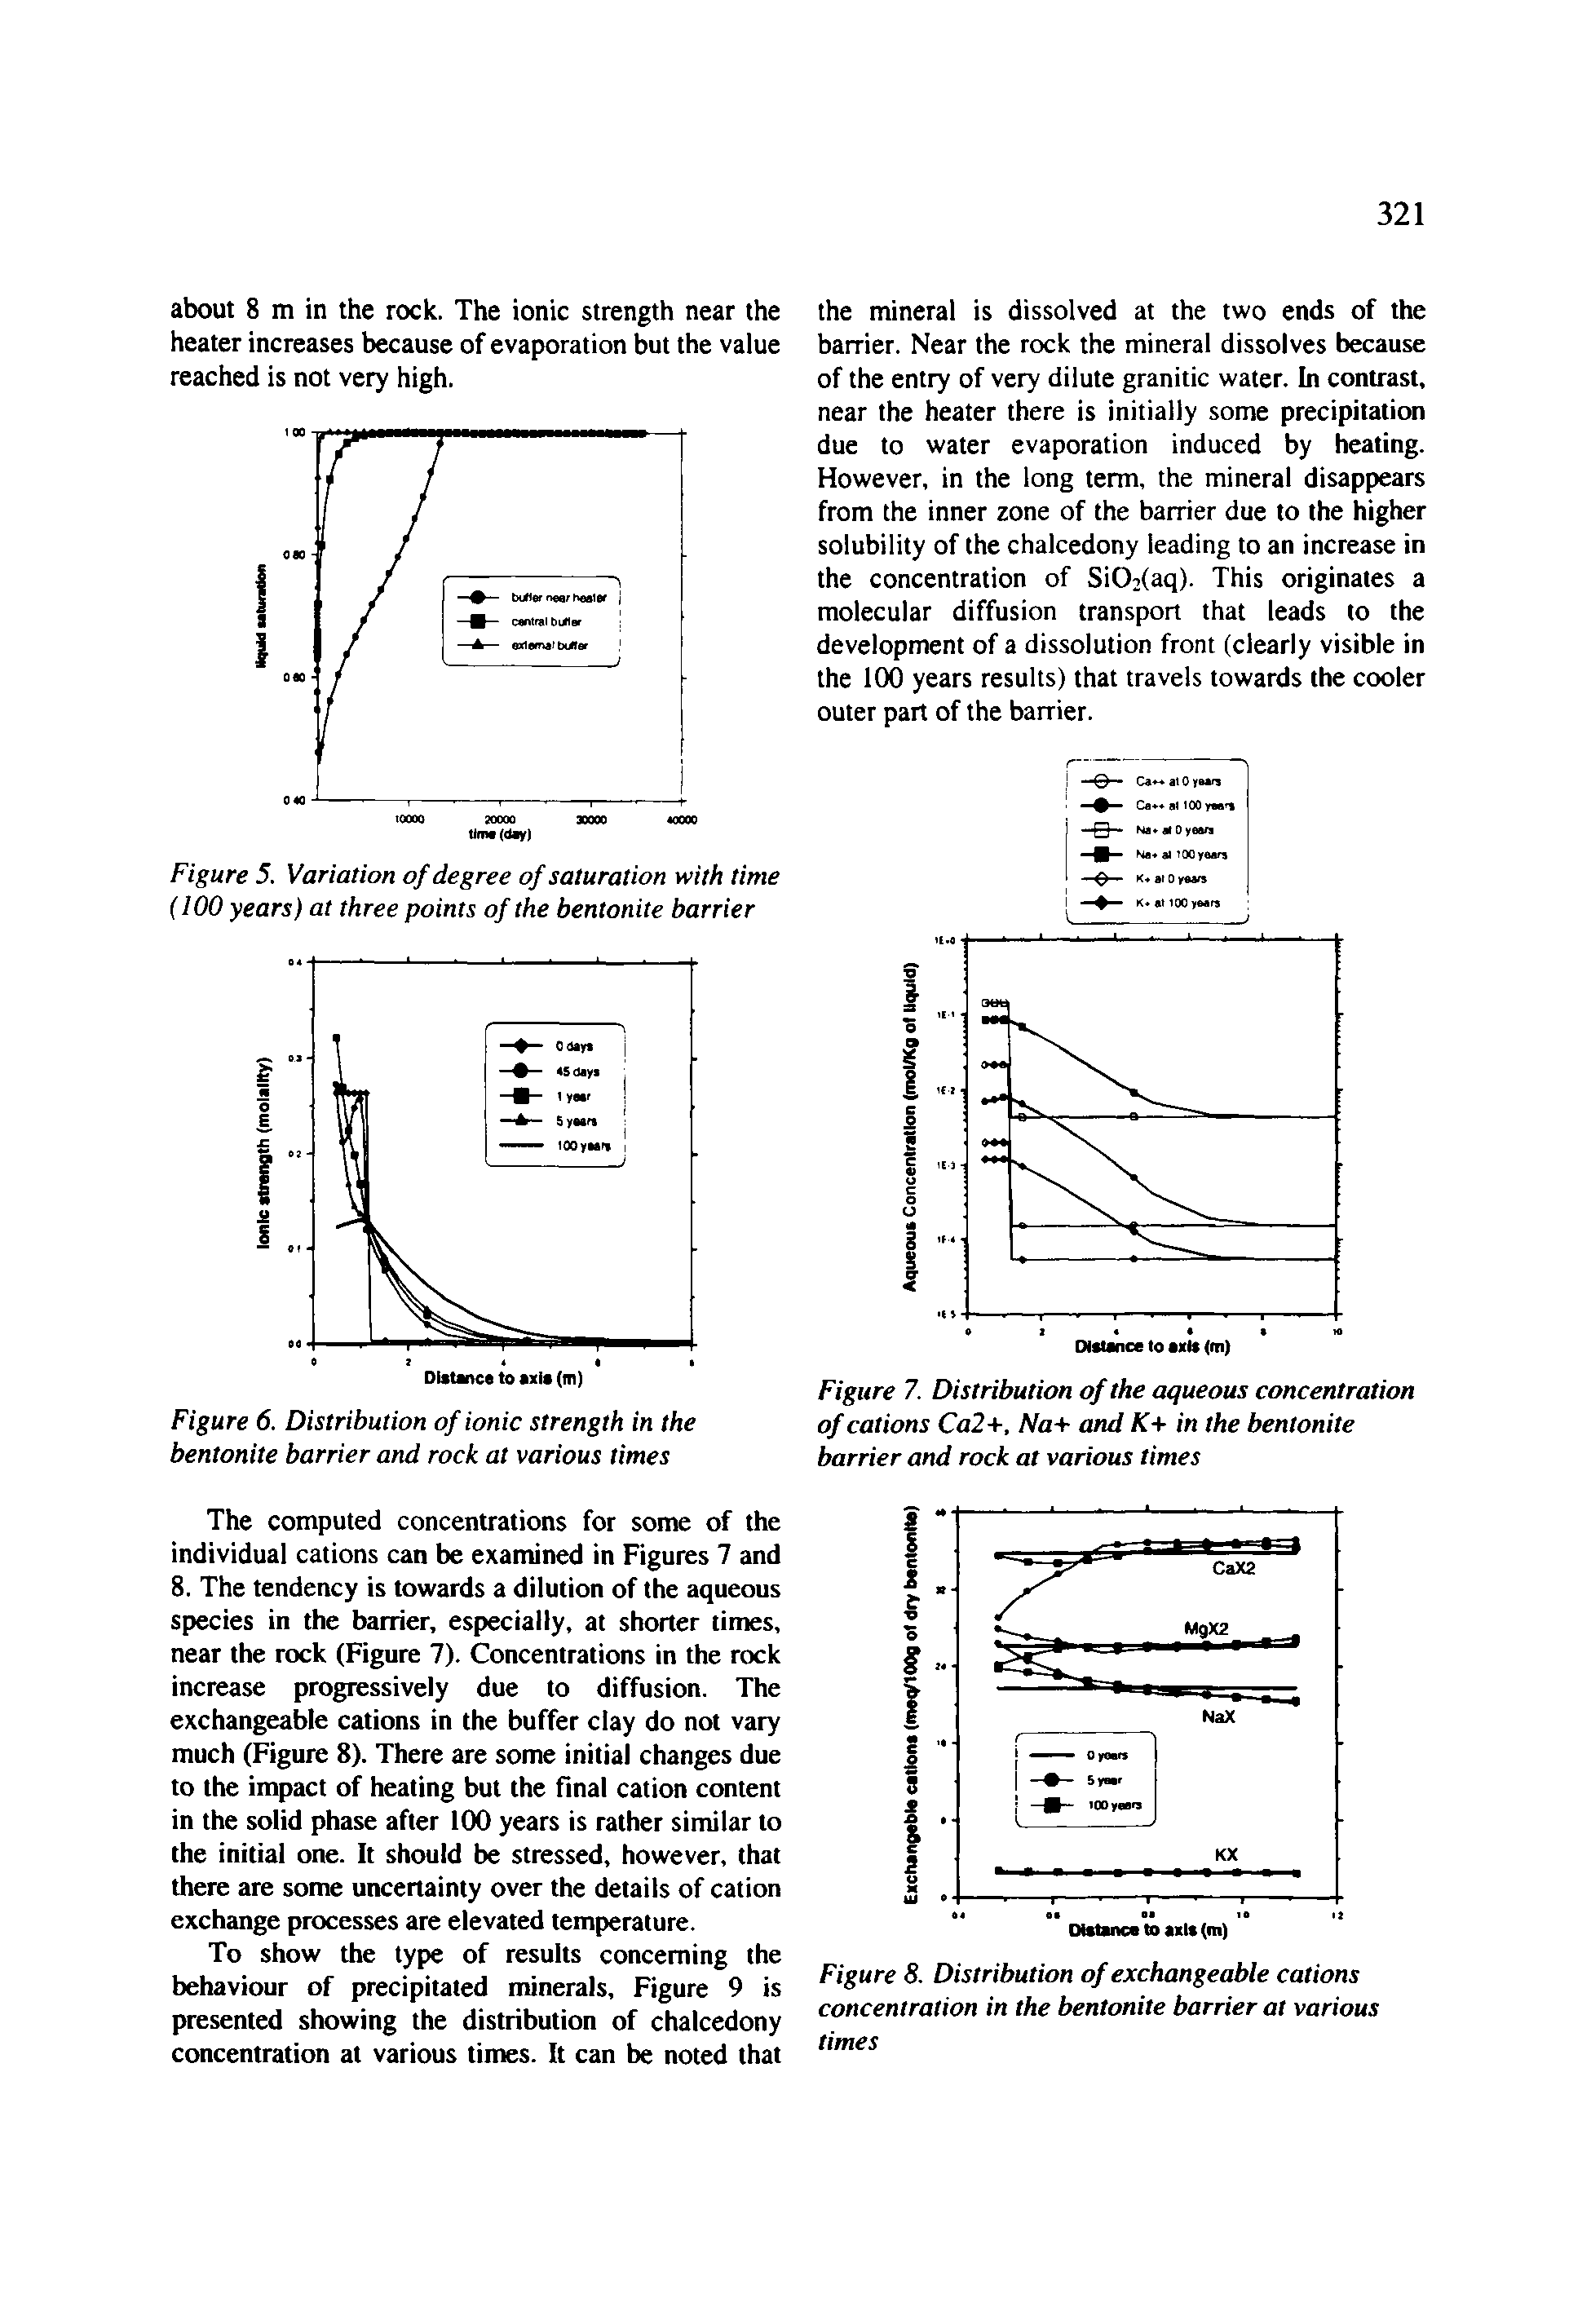 Figure 6. Distribution of ionic strength in the bentonite barrier and rock at various times...